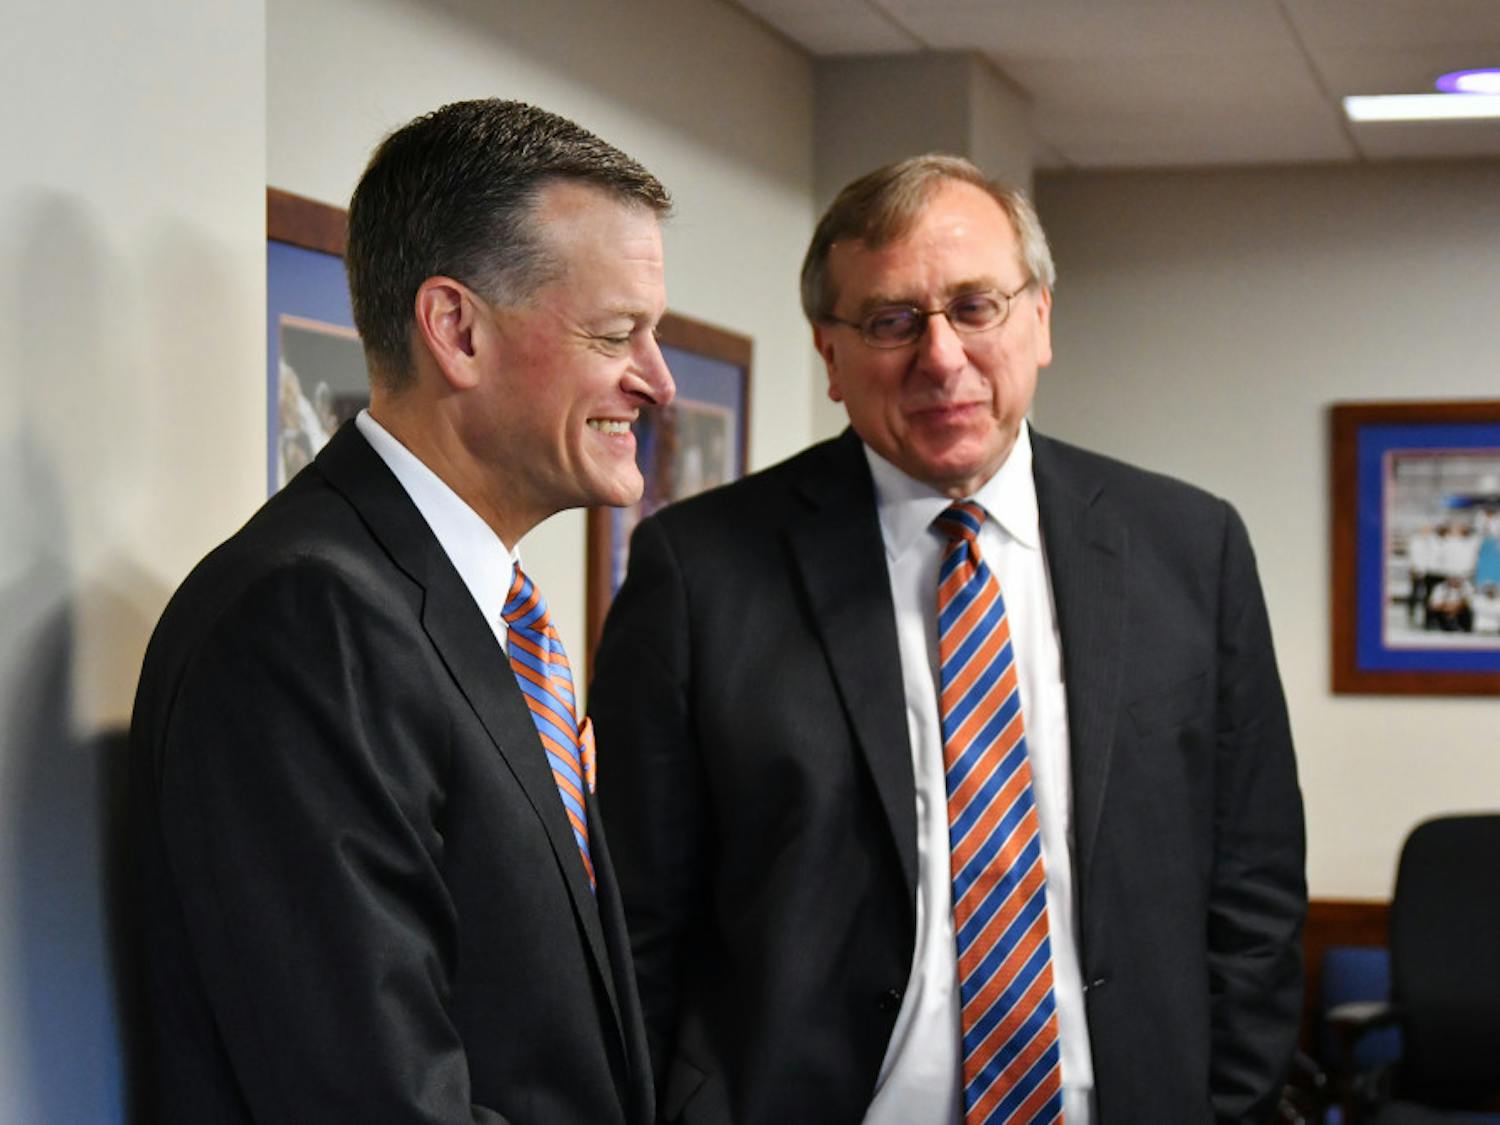 Scott Stricklin, UF's new athletic director, speaks with UF president Kent Fuchs during a UAA board meeting. Stricklin, who has worked as Mississippi State University's athletic director since 2010, was unanimously approved Tuesday morning. 